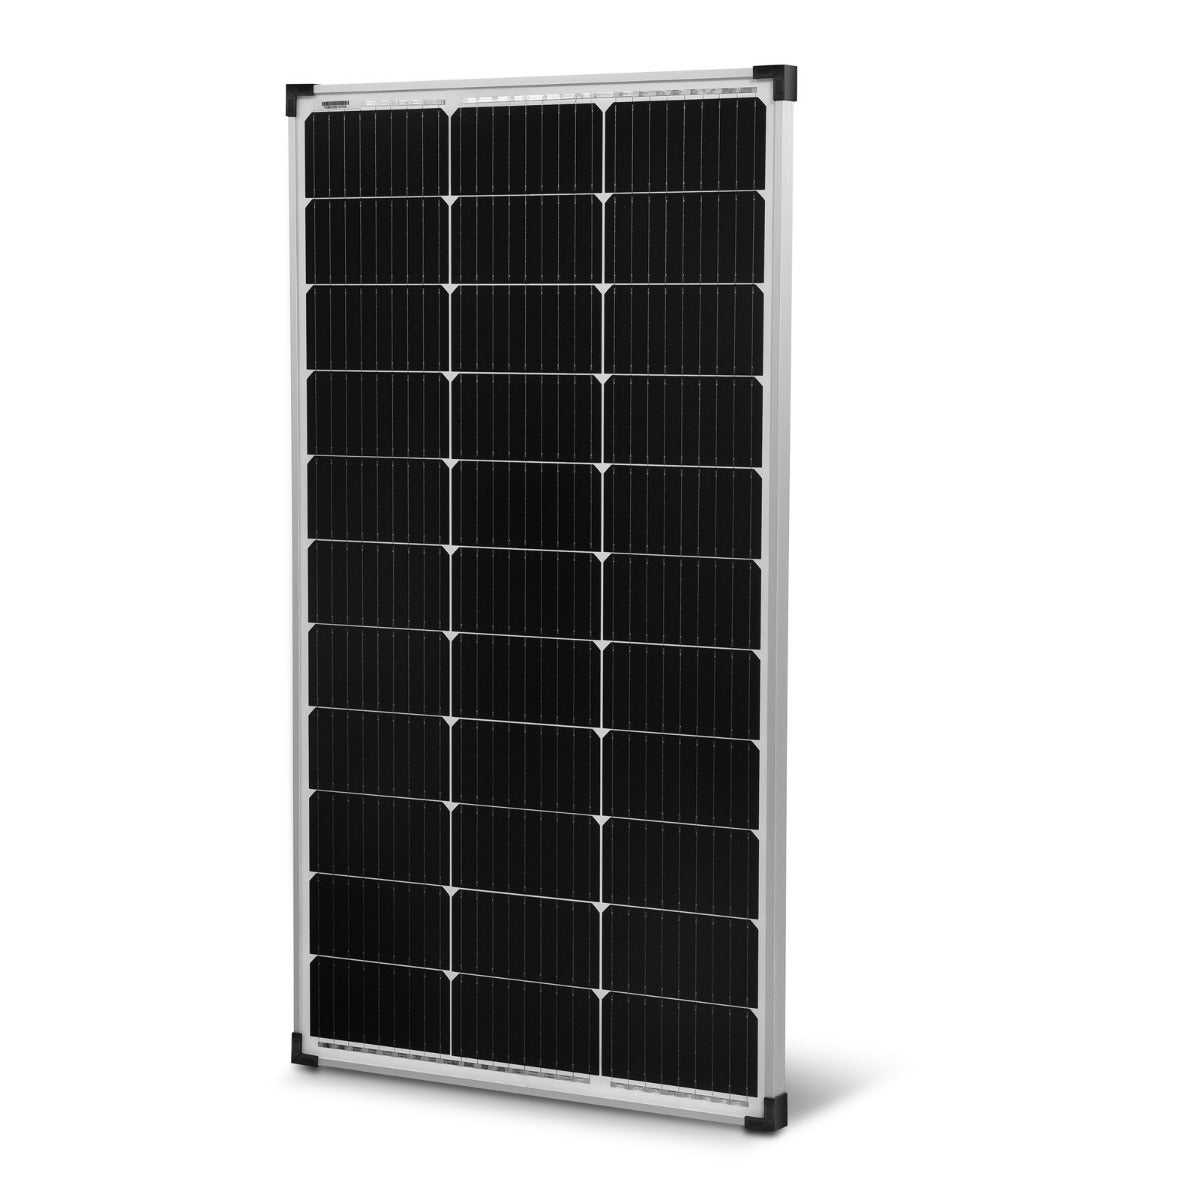 VoltX 12V 100W Solar Panel Mono Fixed RV Camping Portable Battery Charger